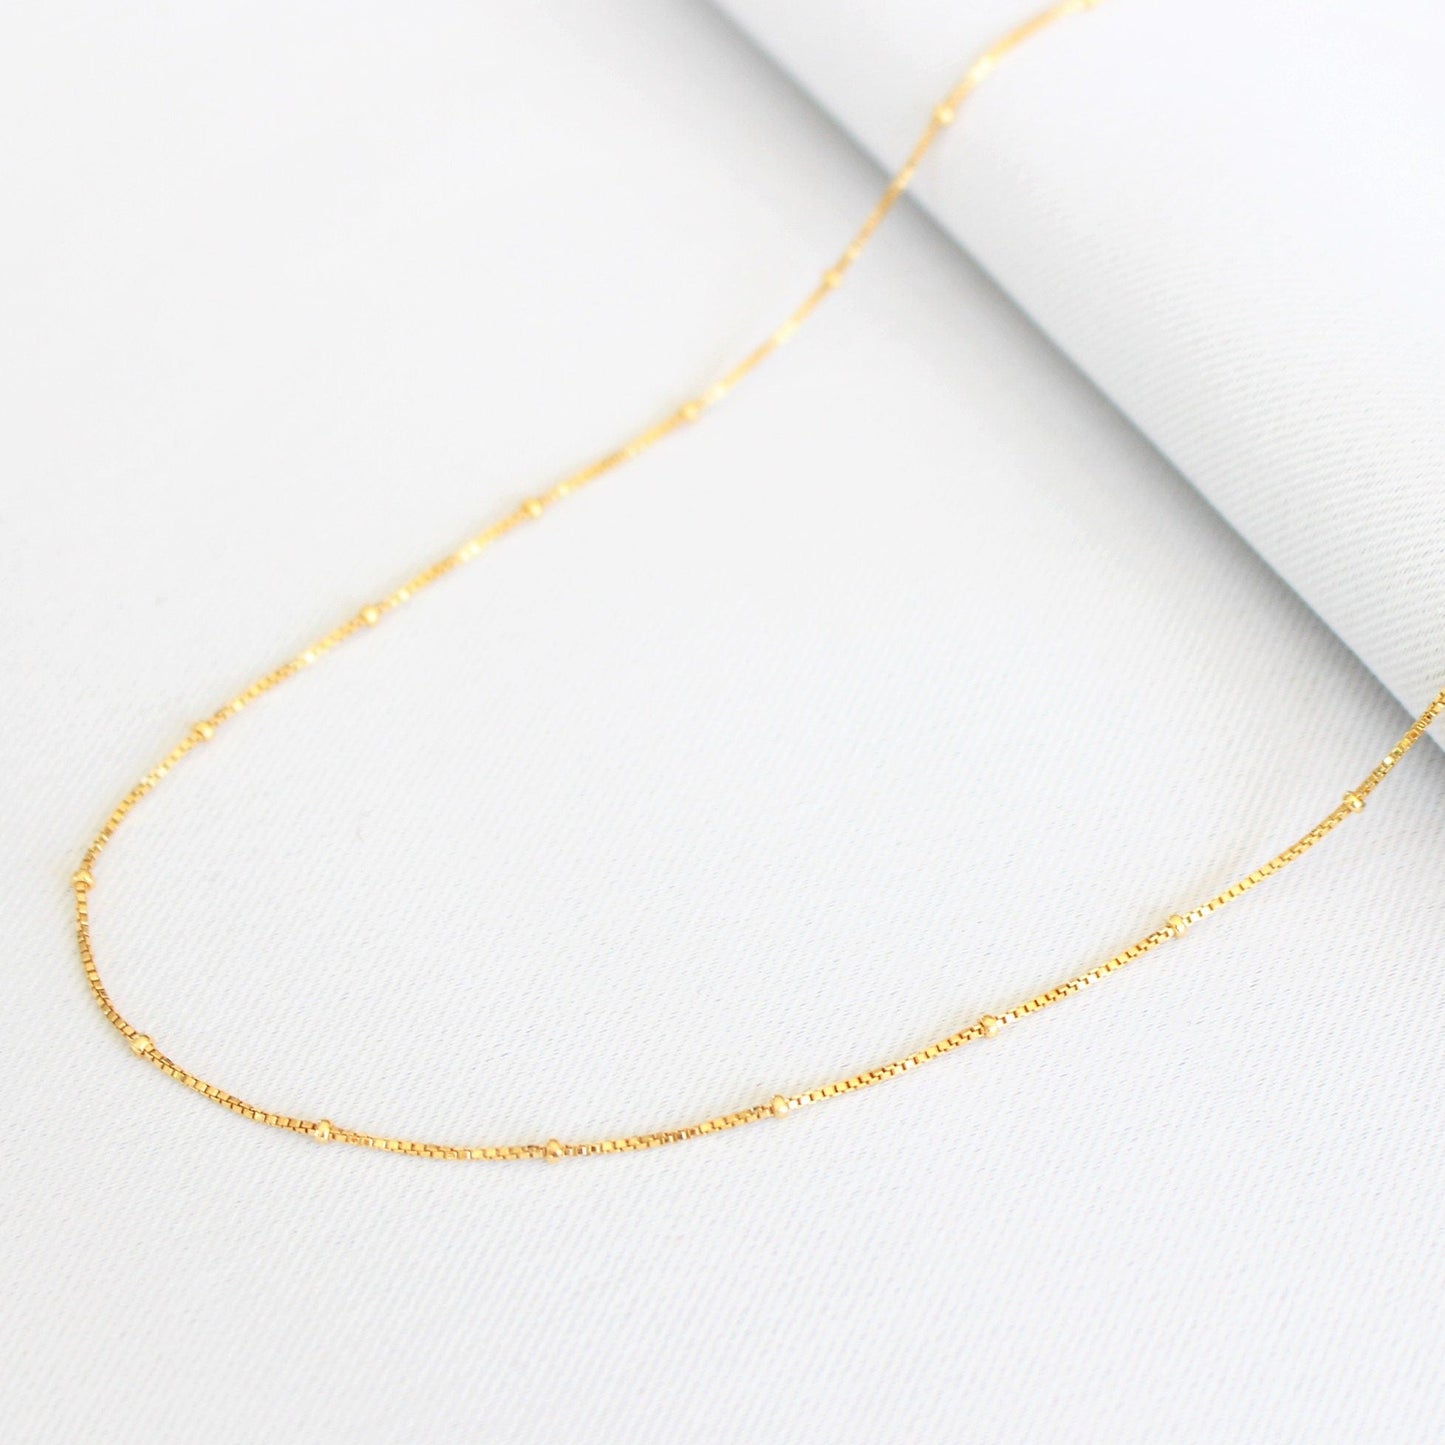 14k gold filled box with beads chain - Satellite necklace